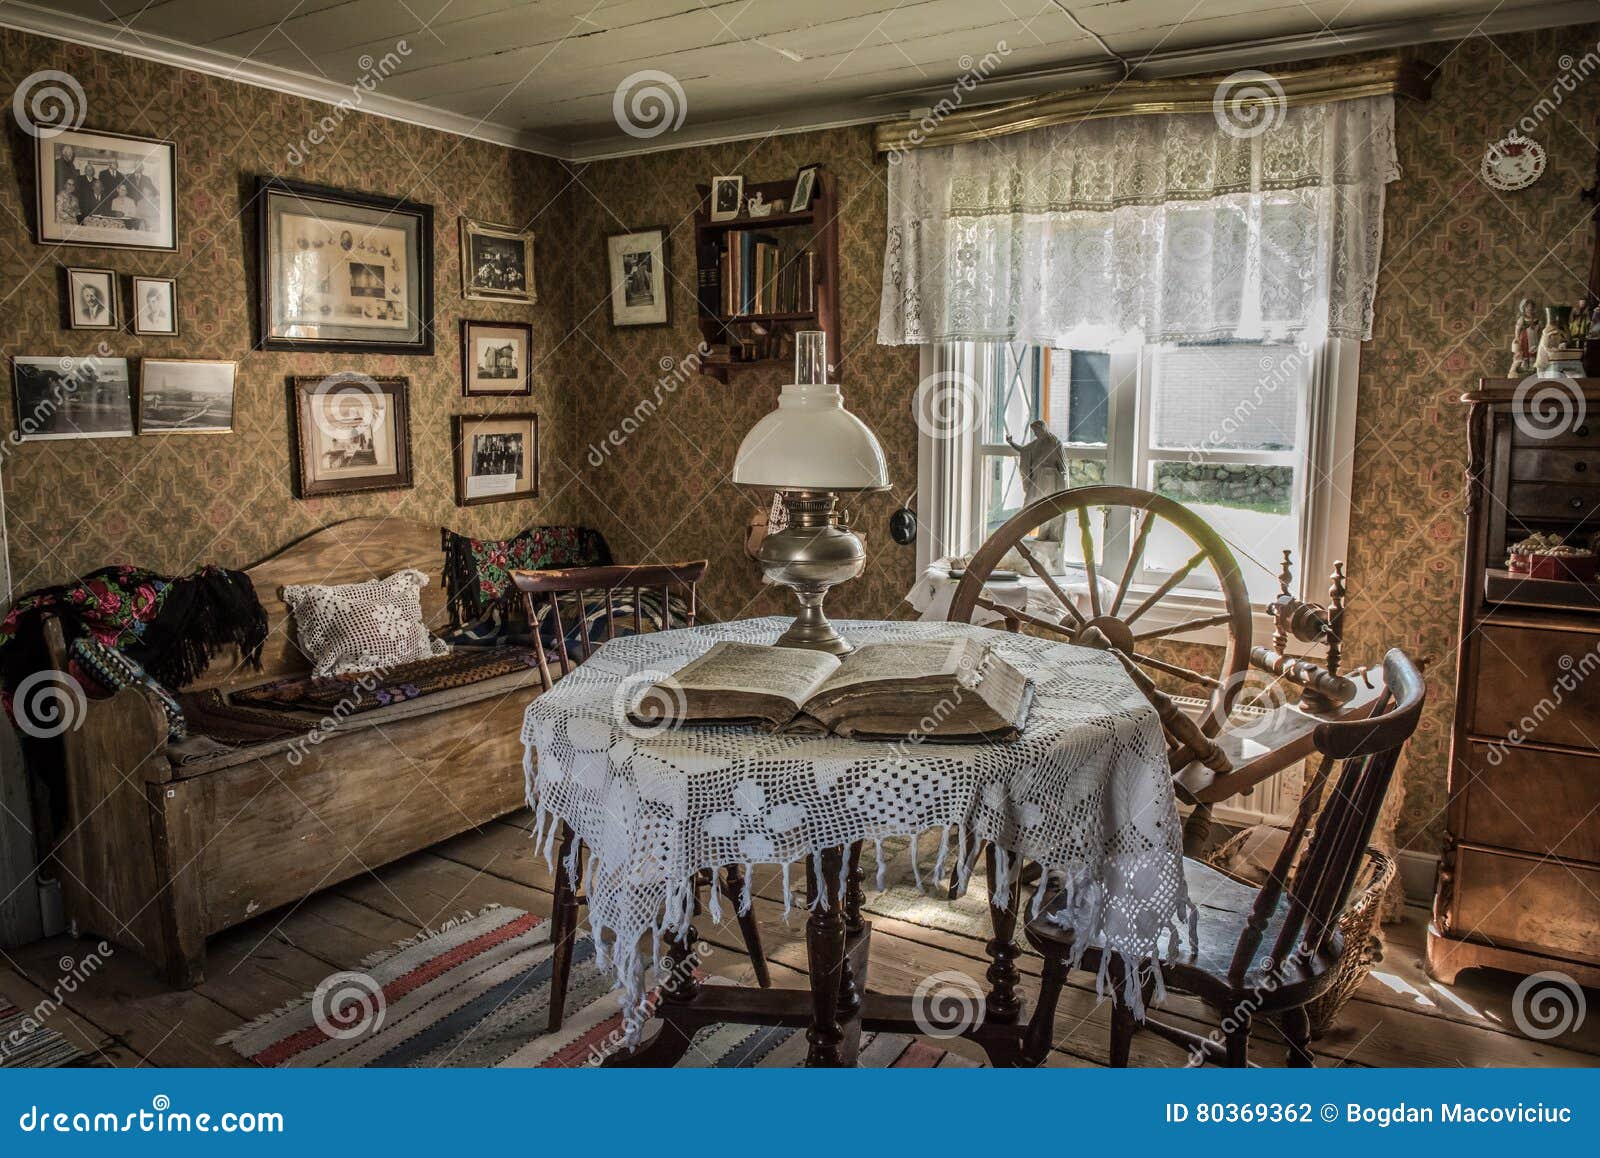 Antique Living Room In An Old Home Editorial Photography Image